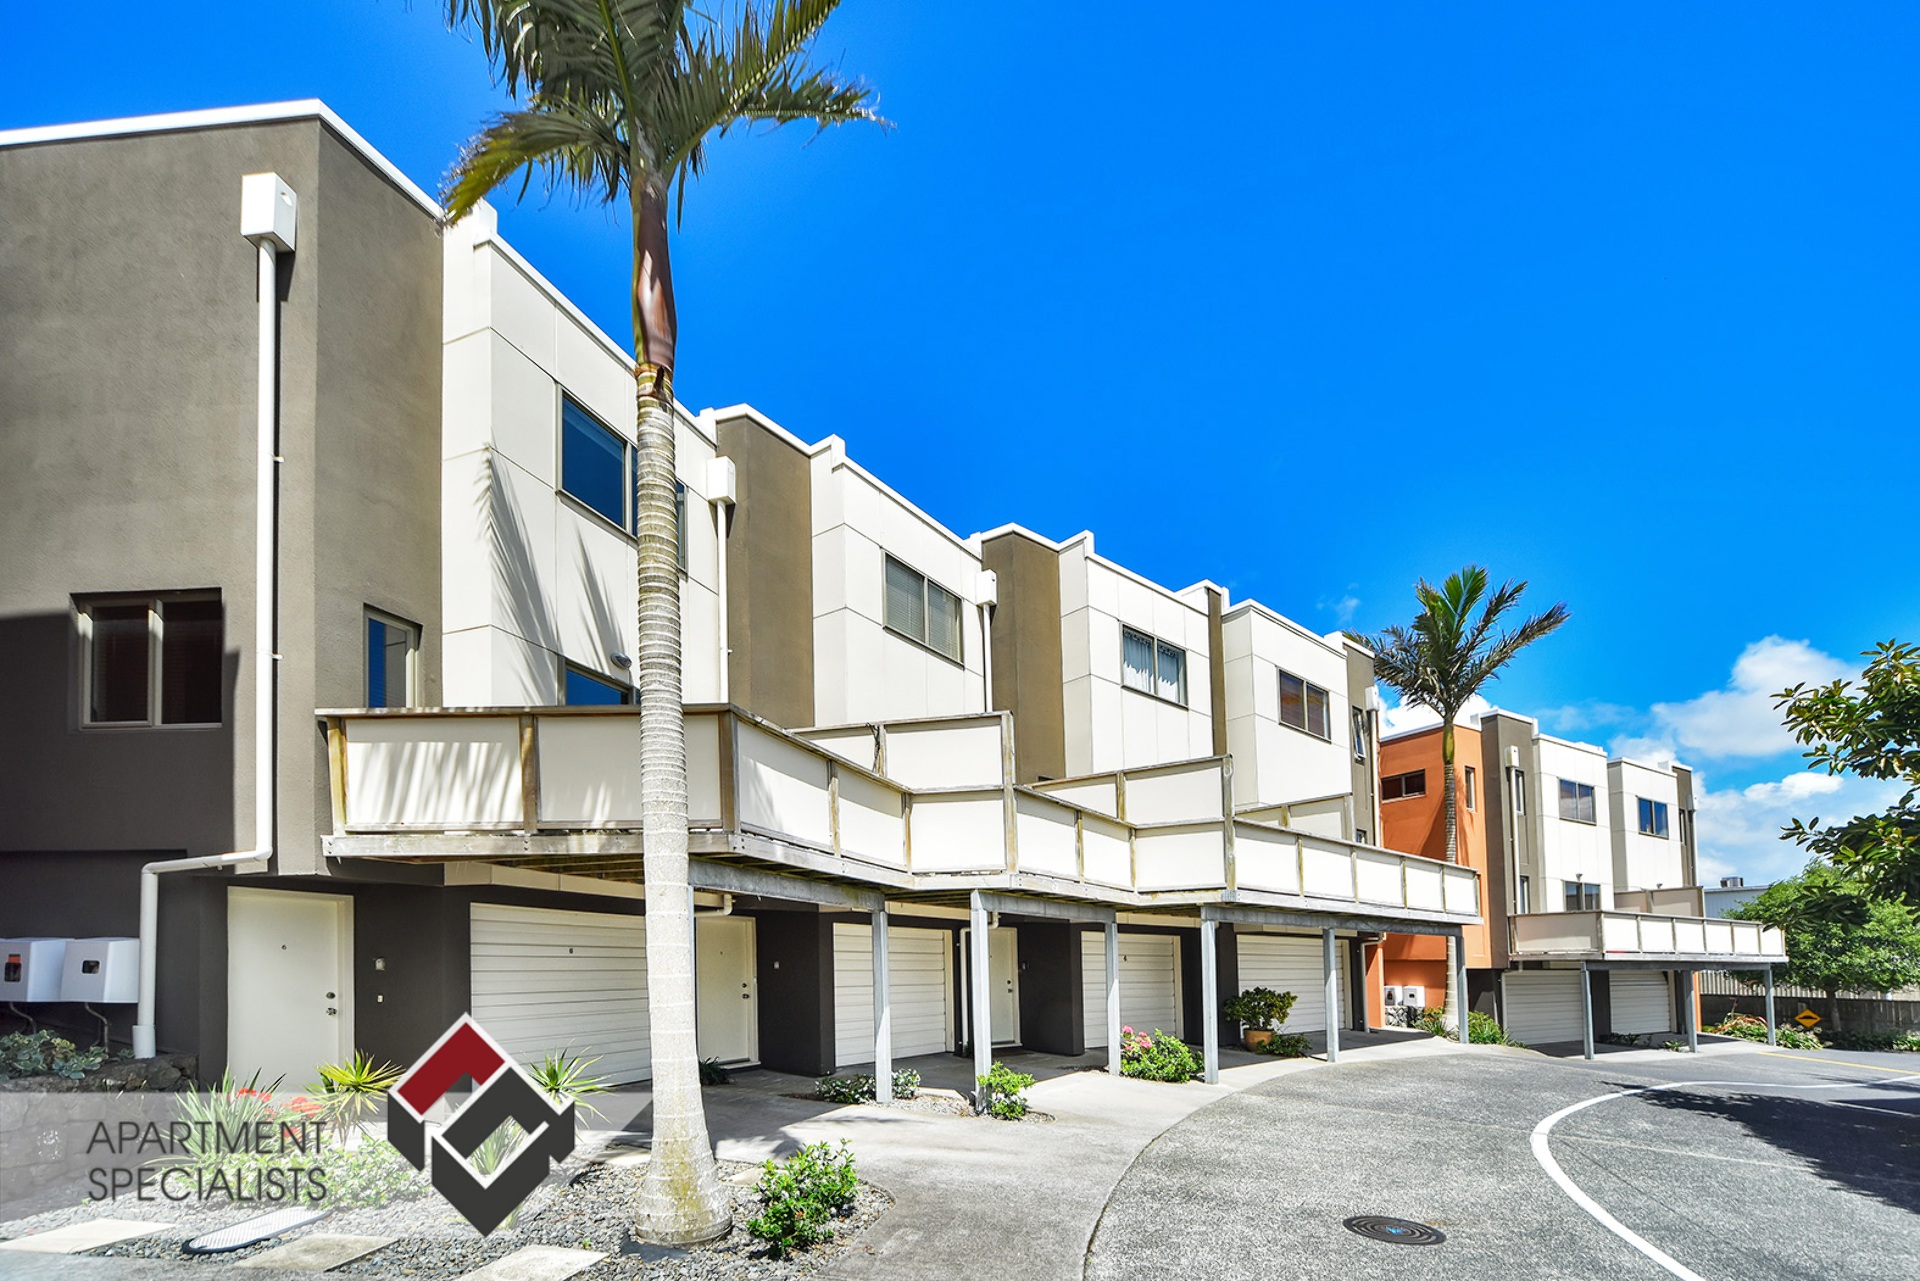 10 | 21 Hunters Park Drive, Three Kings | Apartment Specialists